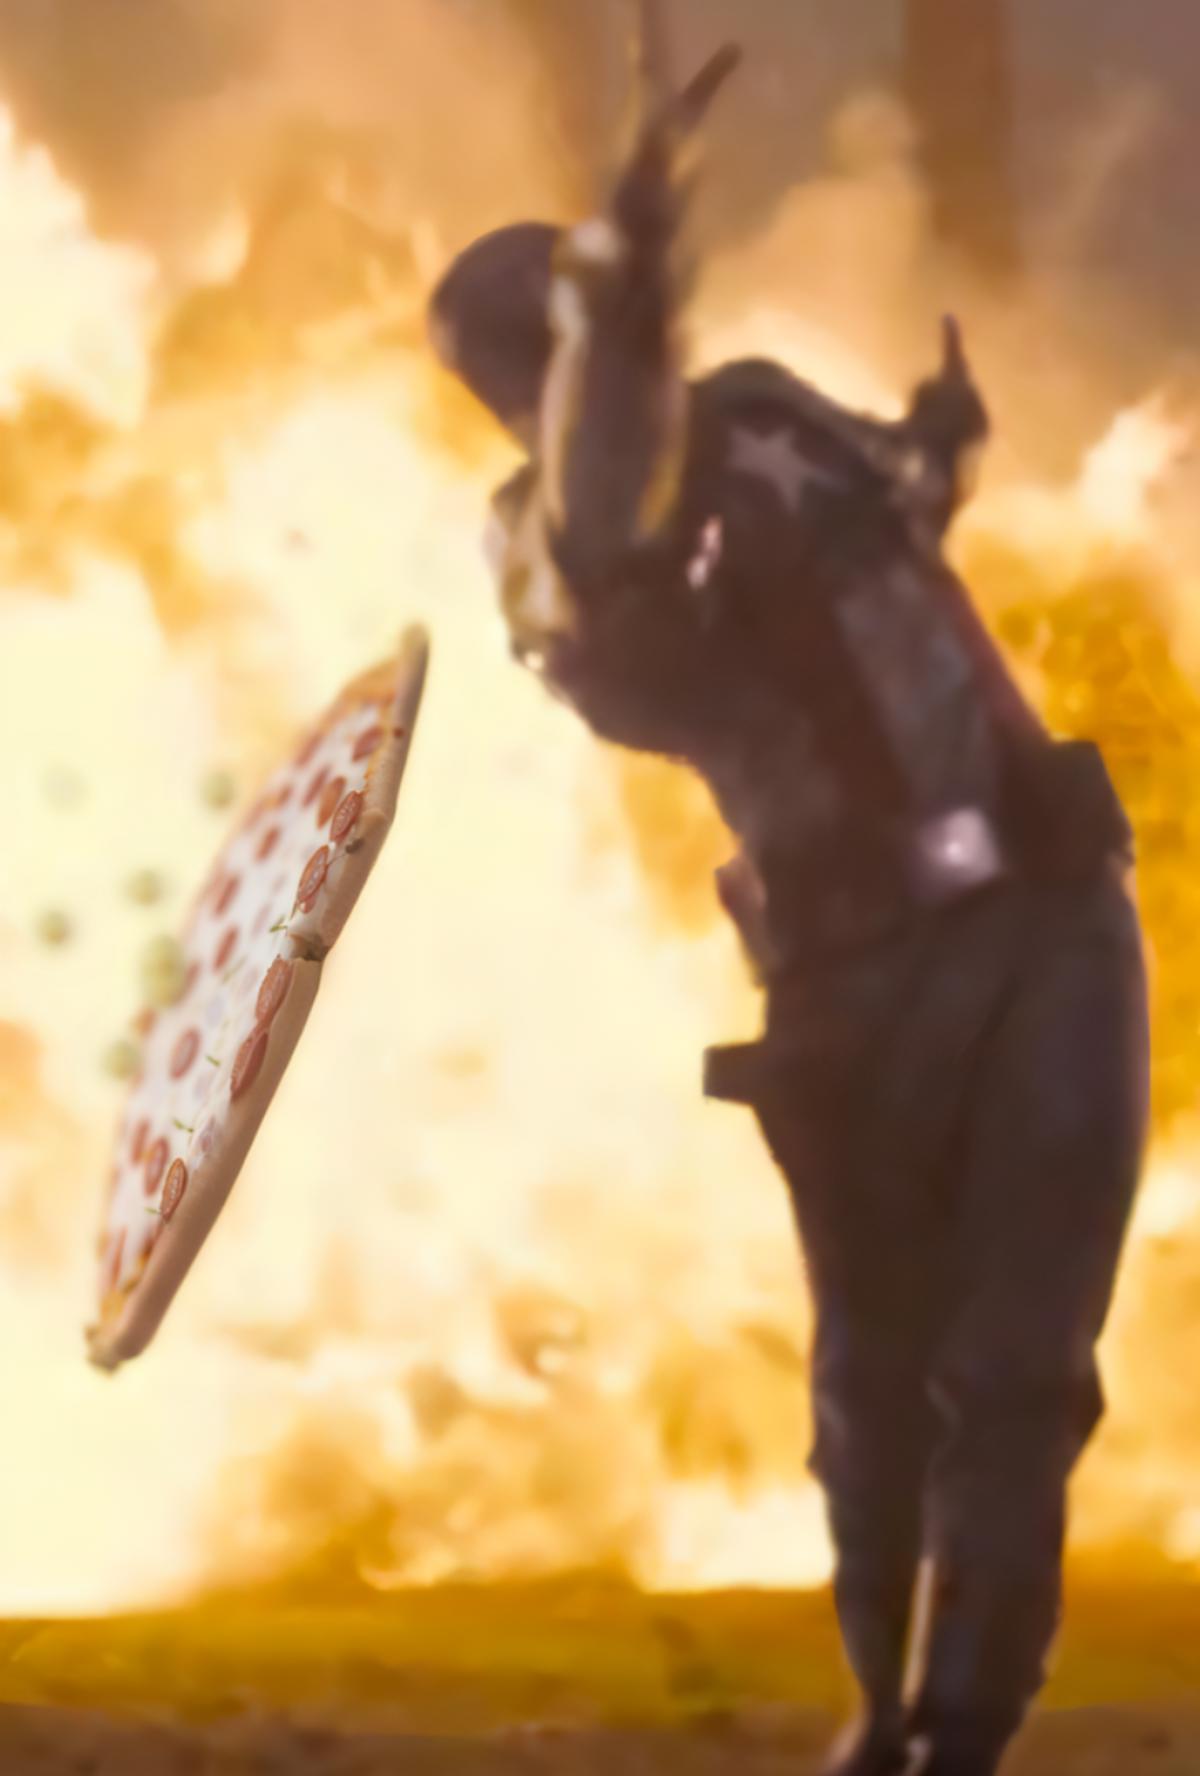 A superhero is catching a pizza in mid-air.